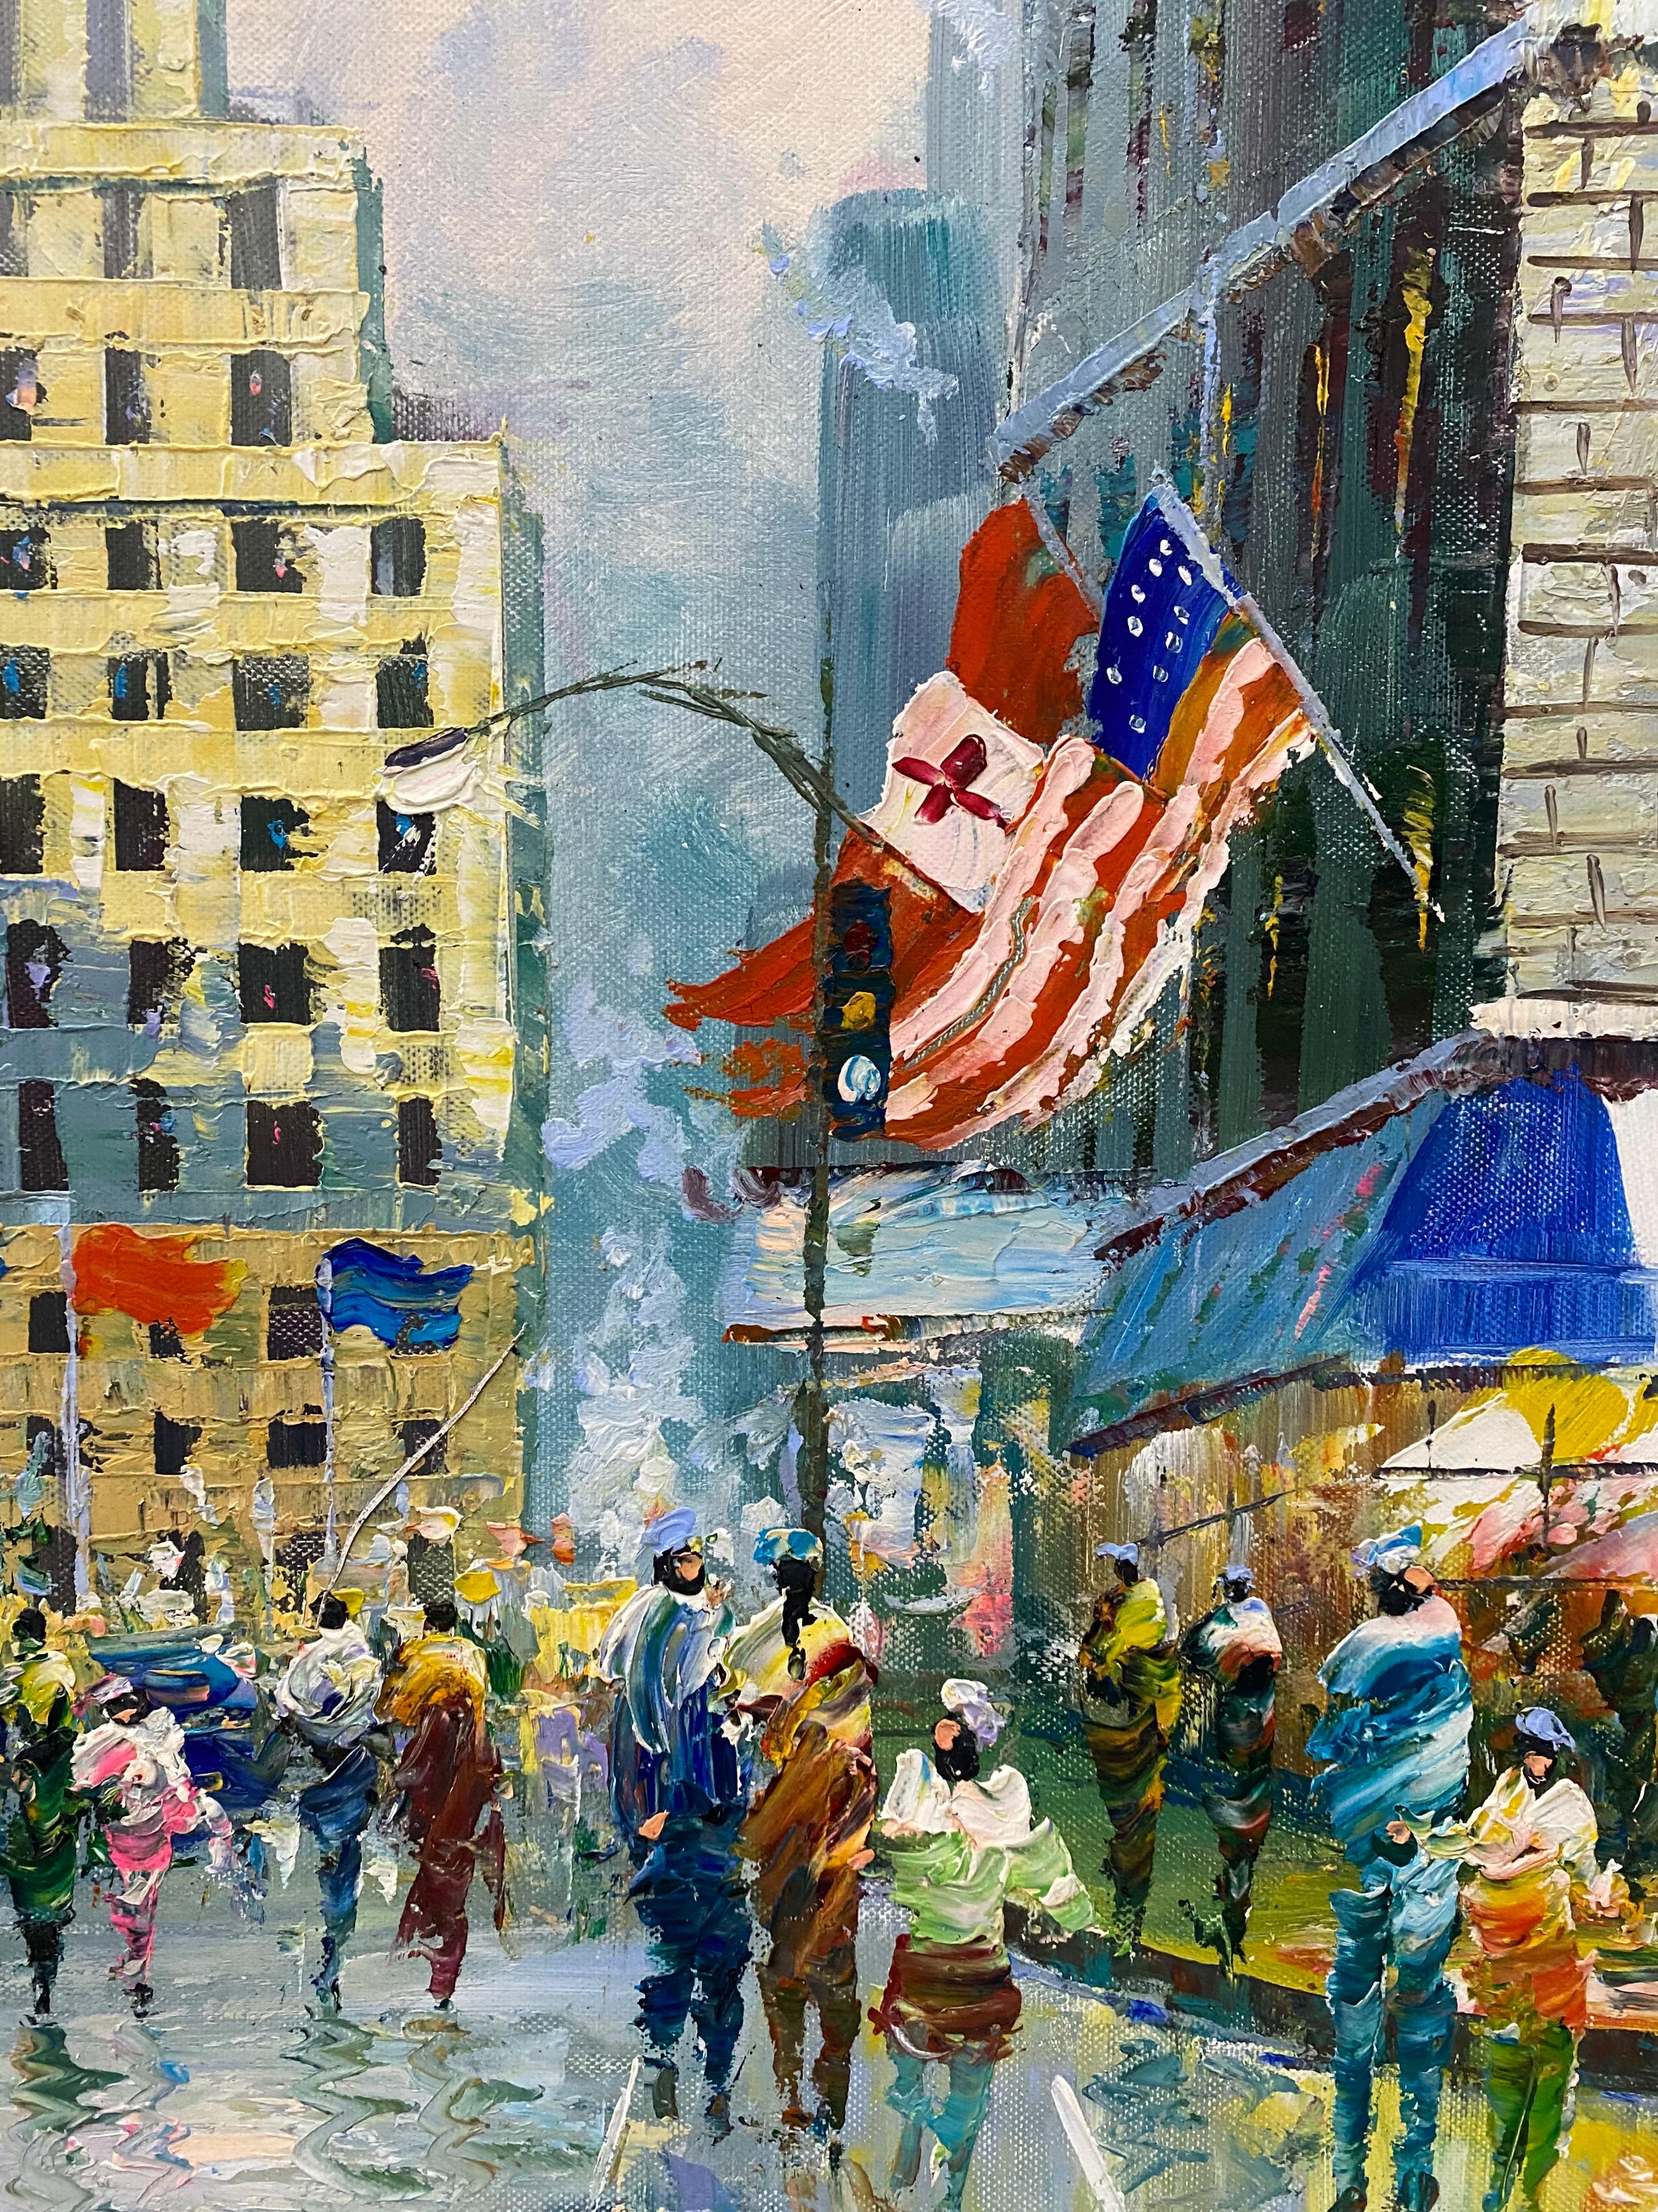 20th Century New York Cityscape W/ Figures & Flags by Sebastian

Oil on canvas

Dimensions 20